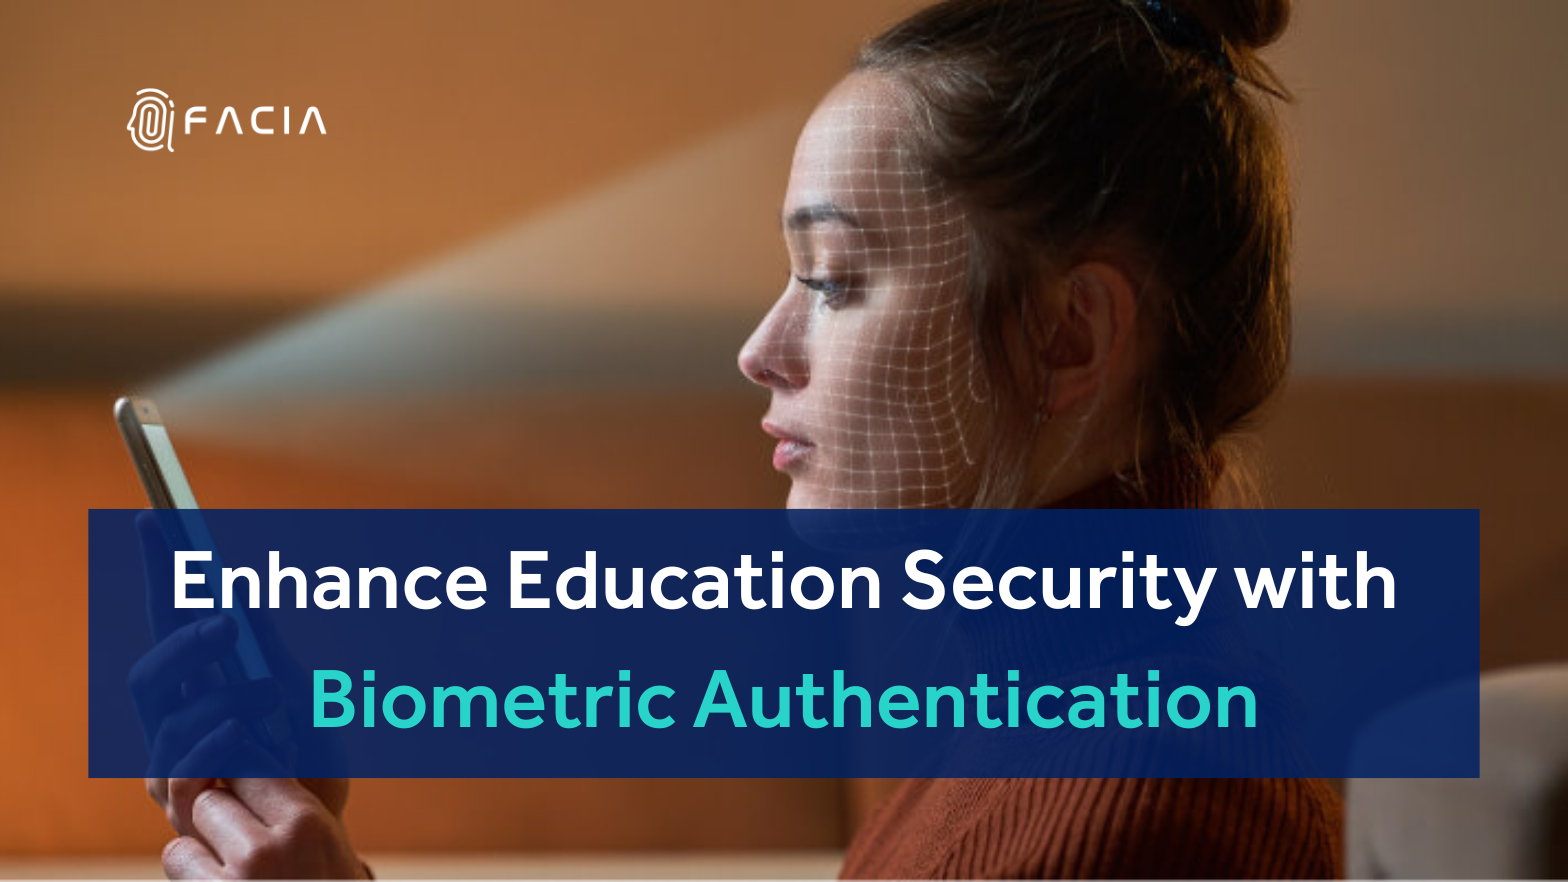 Biometric Authentication in Education Sectors: Enhance Security and prevent identity theft